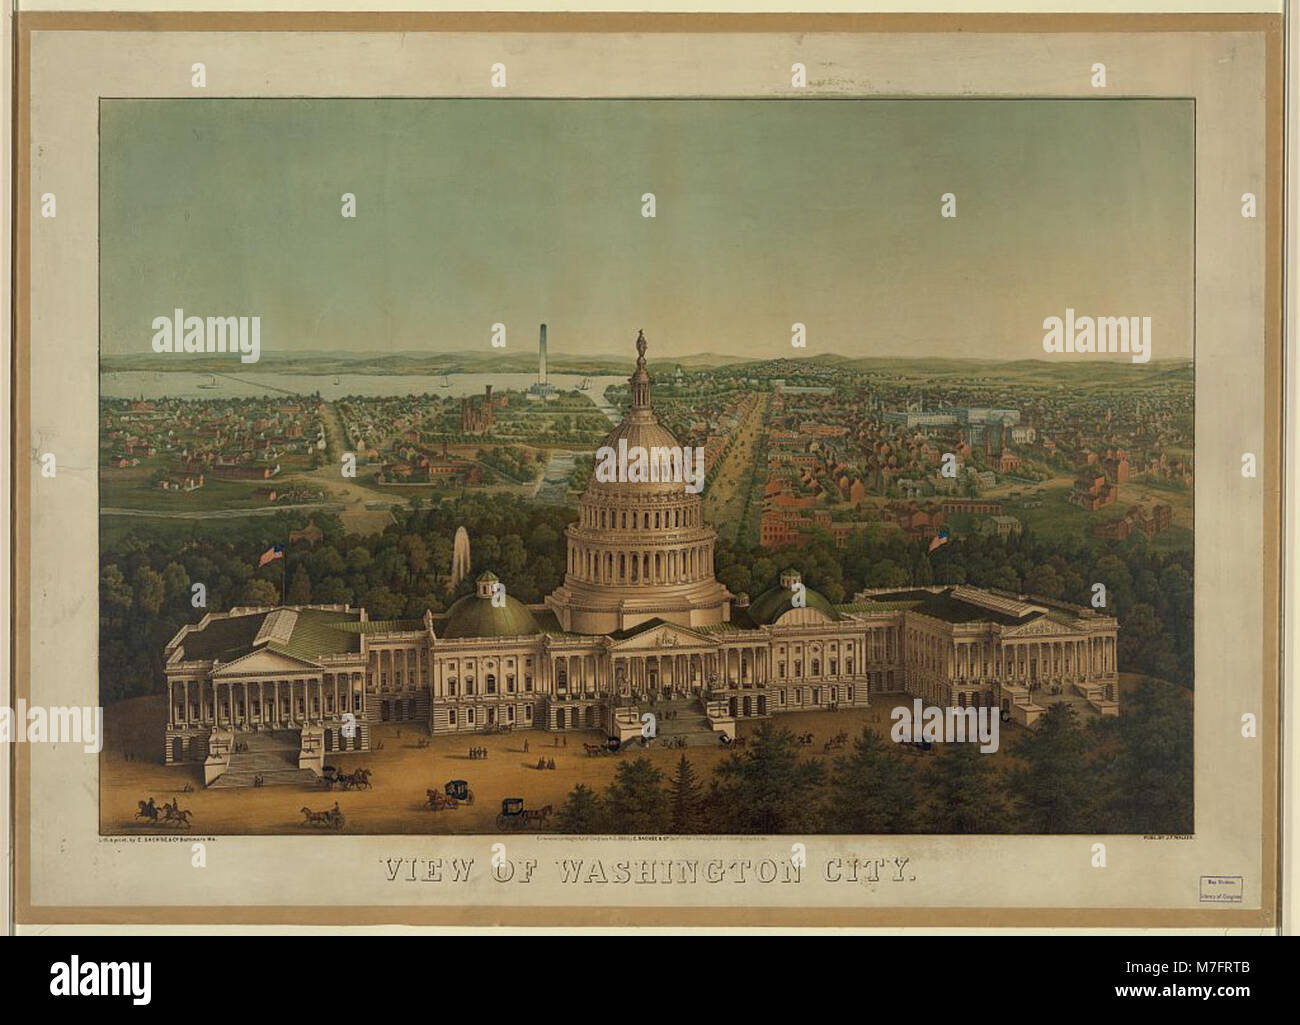 View of Washington City - lith. & print by E. Sachse & Co., Baltimore, Md. LCCN00650779 Stock Photo